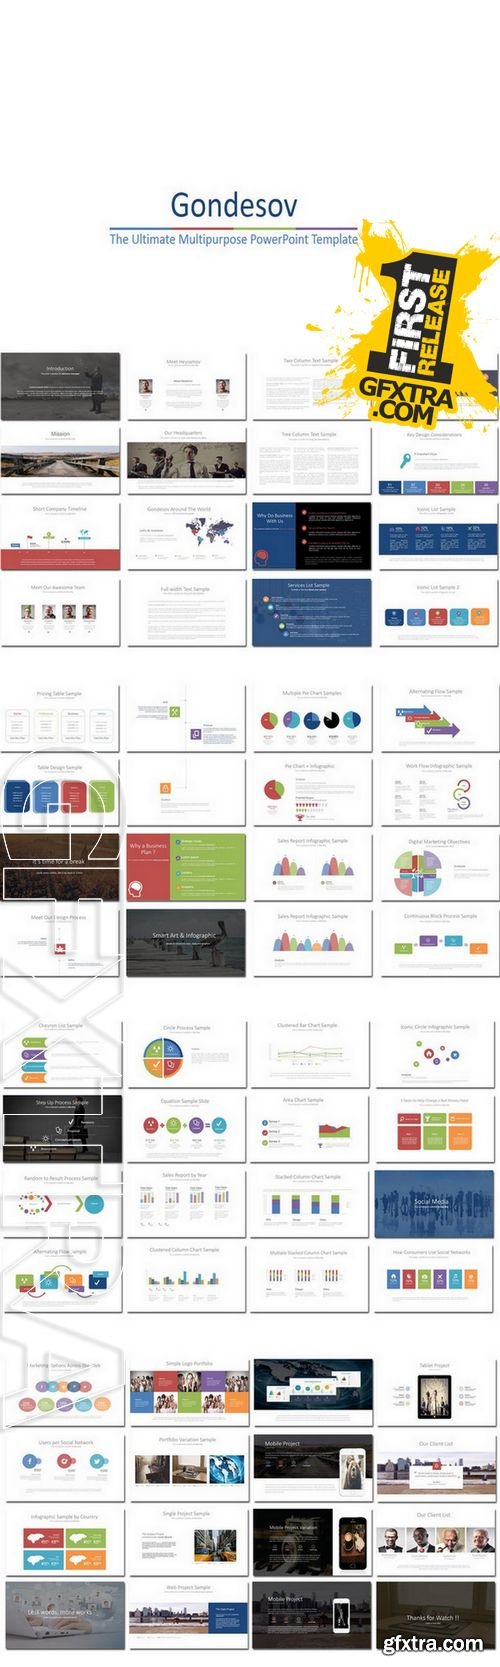 Titipan Powerpoint Template - CM 254495